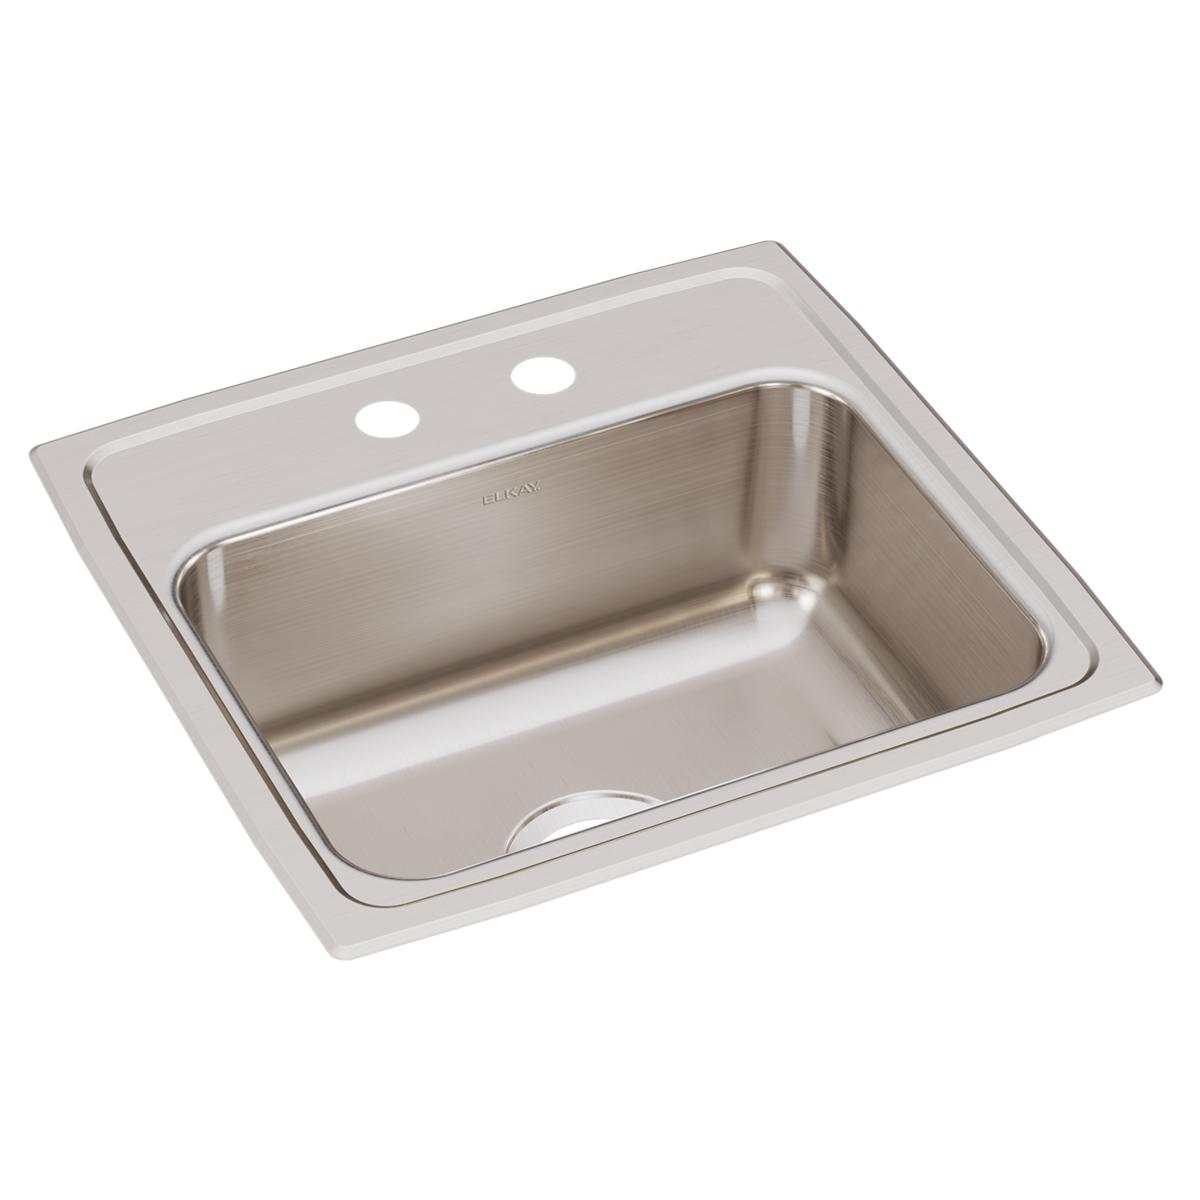 Elkay Lustertone Classic 19" x 18" x 7-5/8" Single Bowl Drop-in Sink with Quick-clip